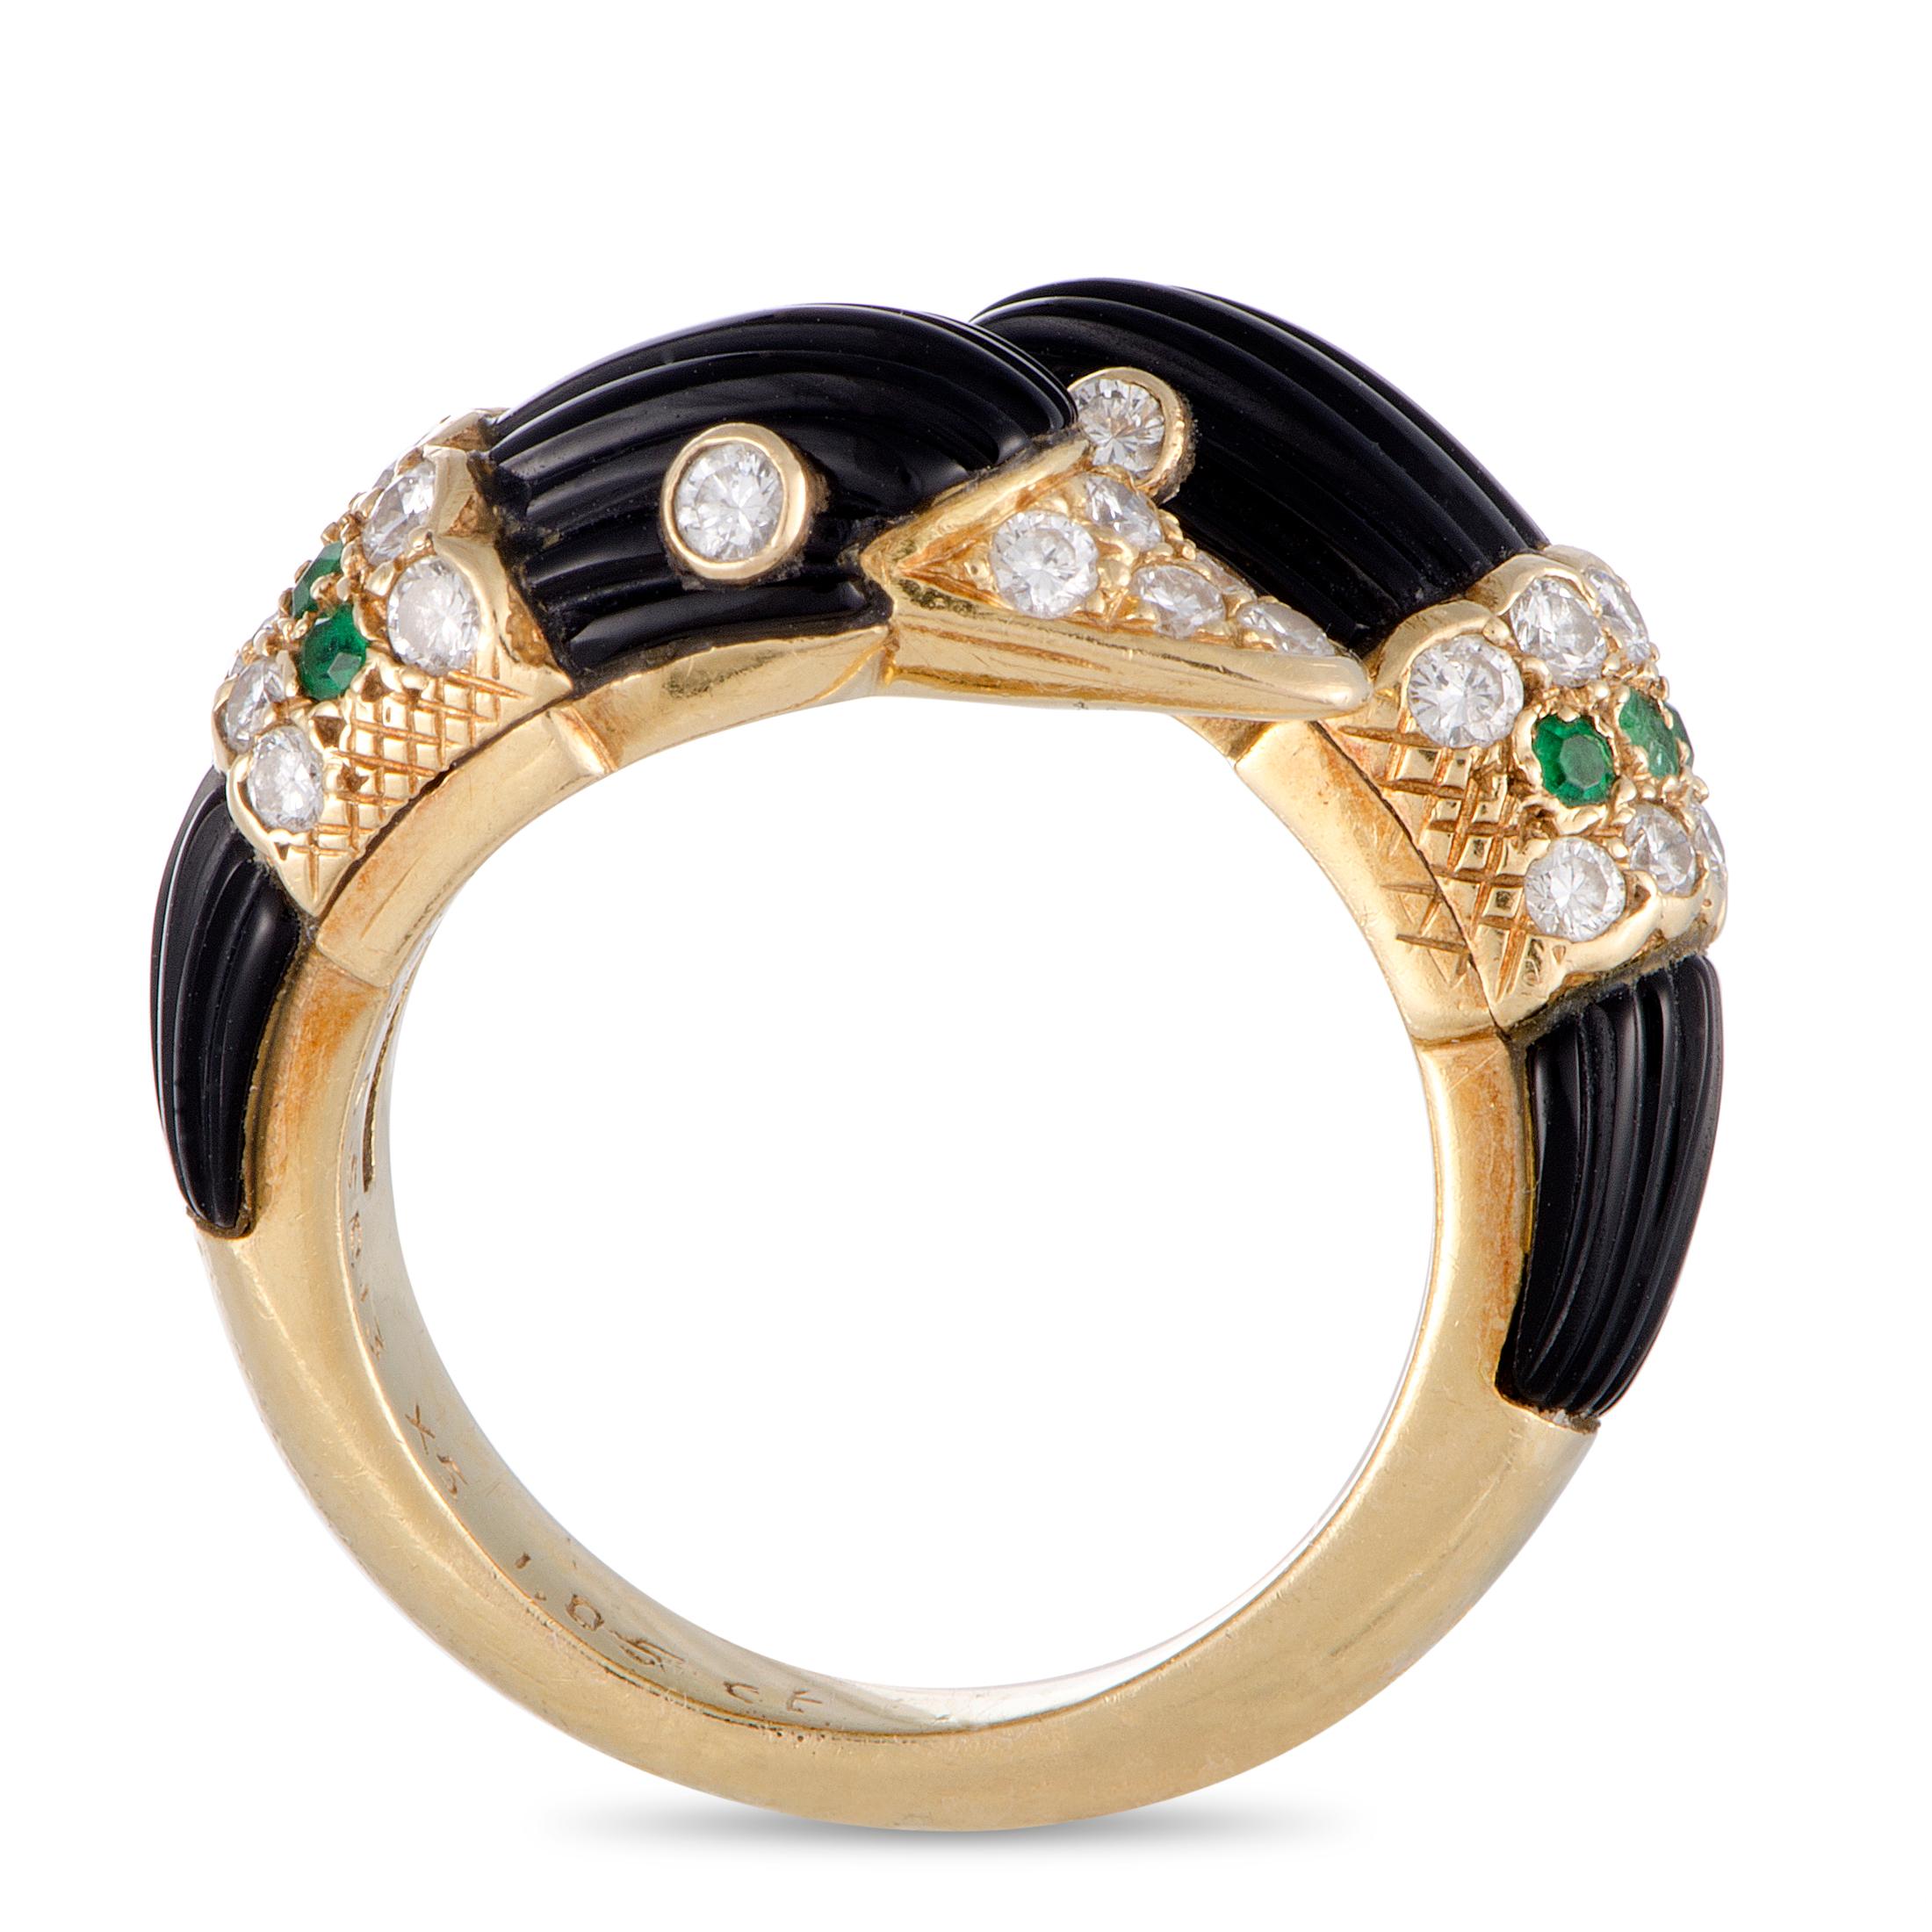 This Van Cleef & Arpels vintage ring is made out of 18K yellow gold, diamonds, emeralds, and fluted onyx. The diamonds boast grade F color and VS1 clarity and total 0.60 carats. The ring weighs 10.6 grams, featuring band thickness of 3 mm and top